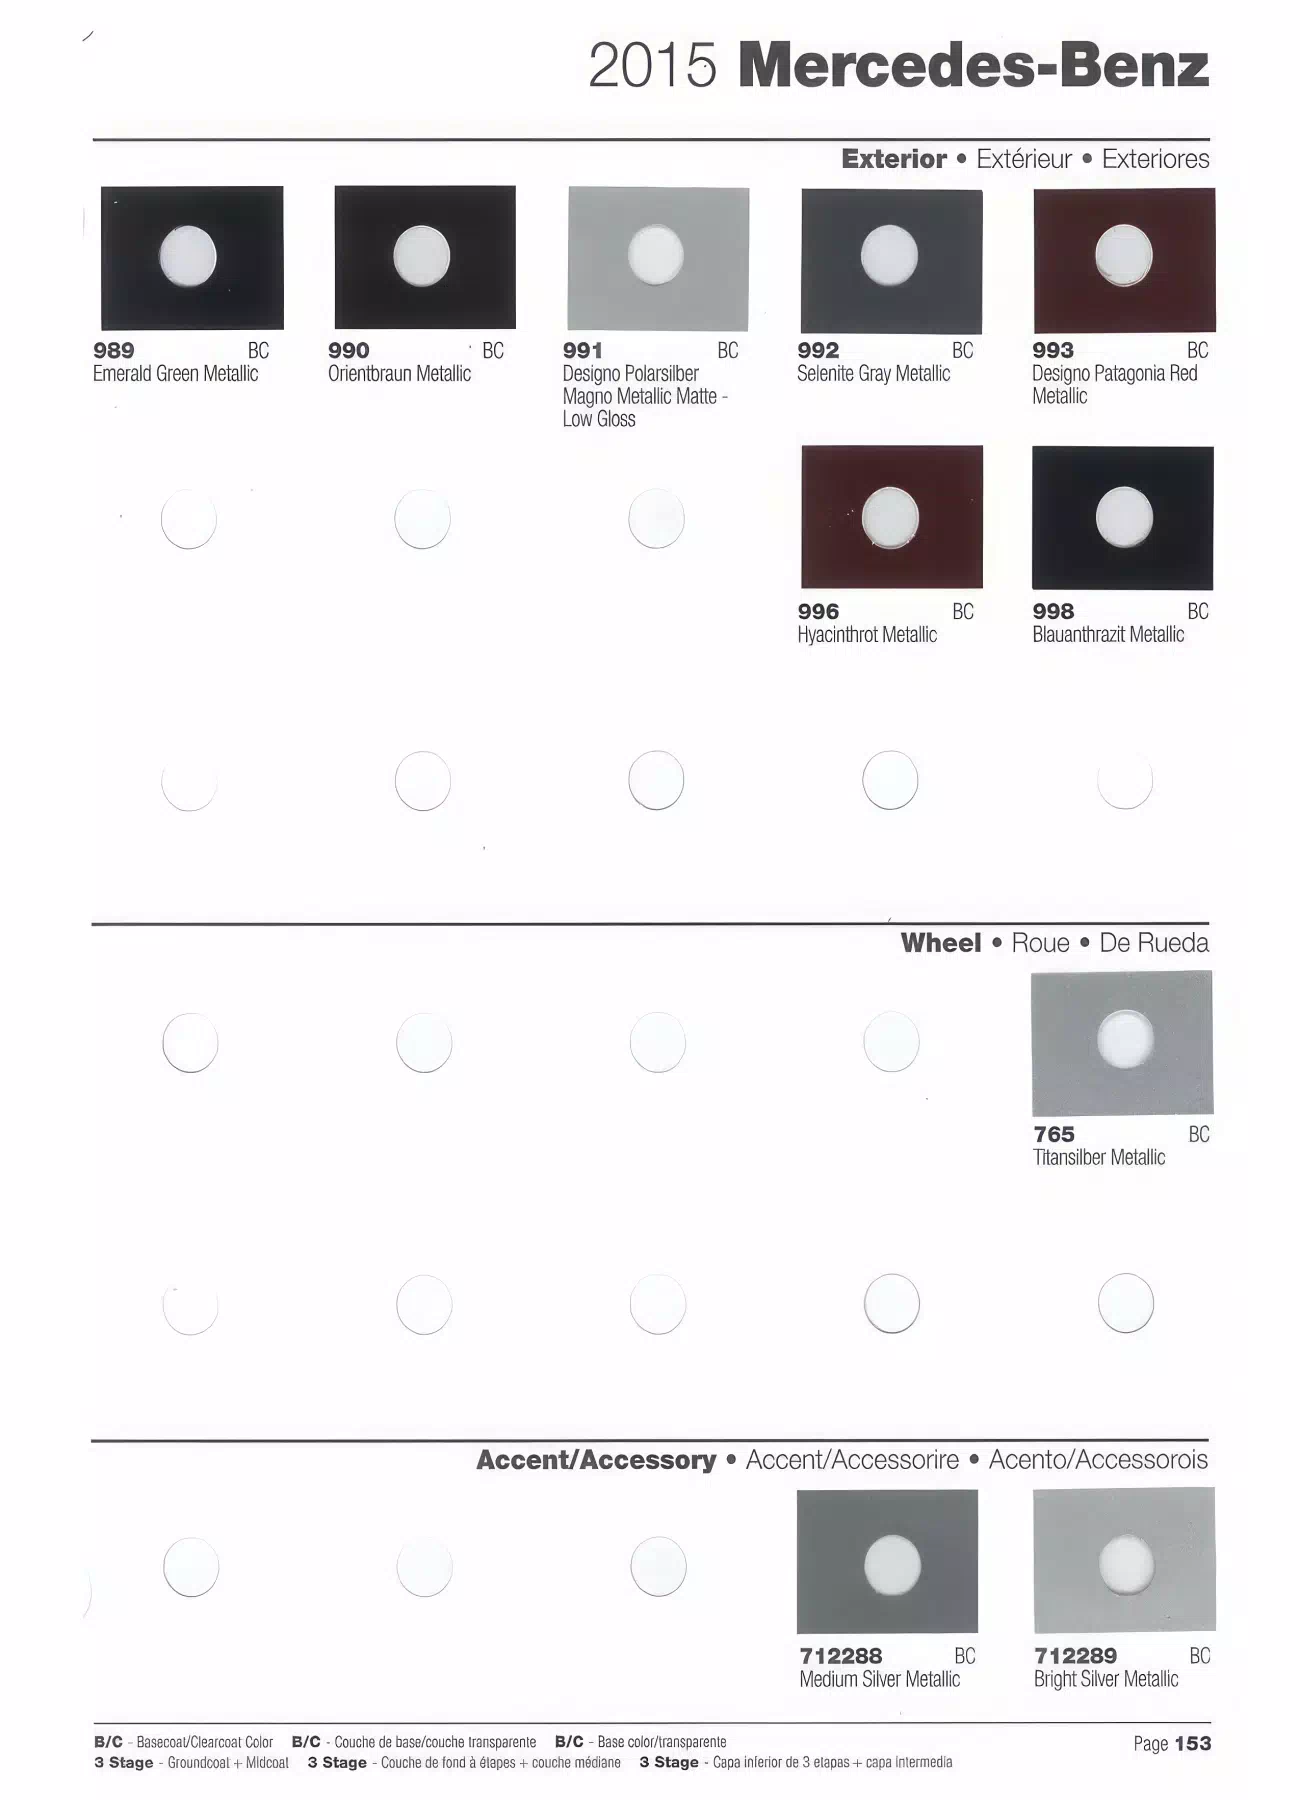 A paint chart showing paint swatches, paint codes and color names  for 2015 Mercedes-Benz automobiles